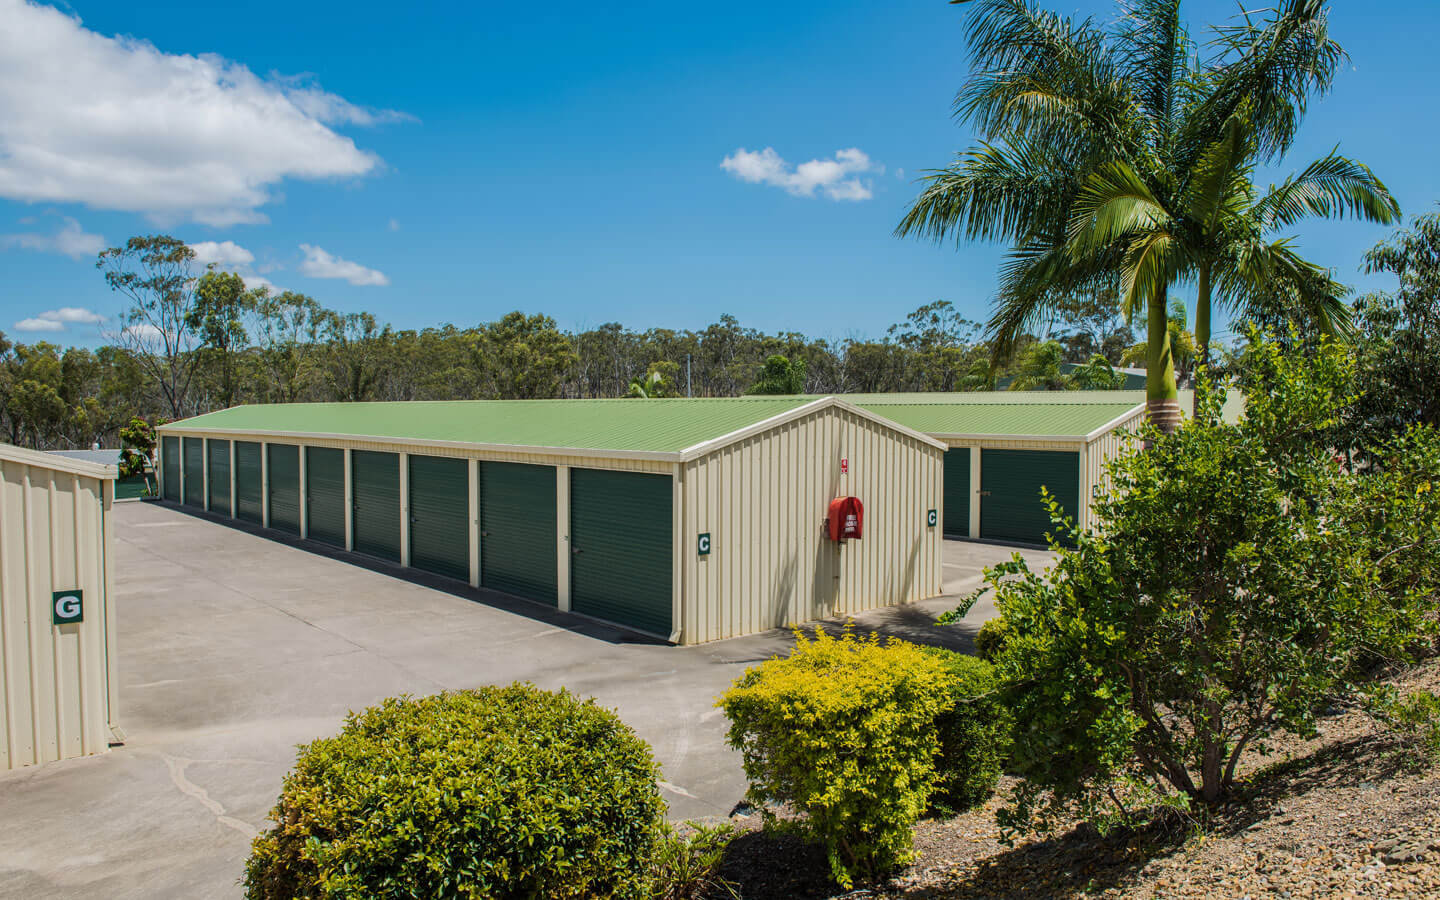 Gladstone Self Storage Affordable Secure Fort Knox Storage pertaining to size 1440 X 900